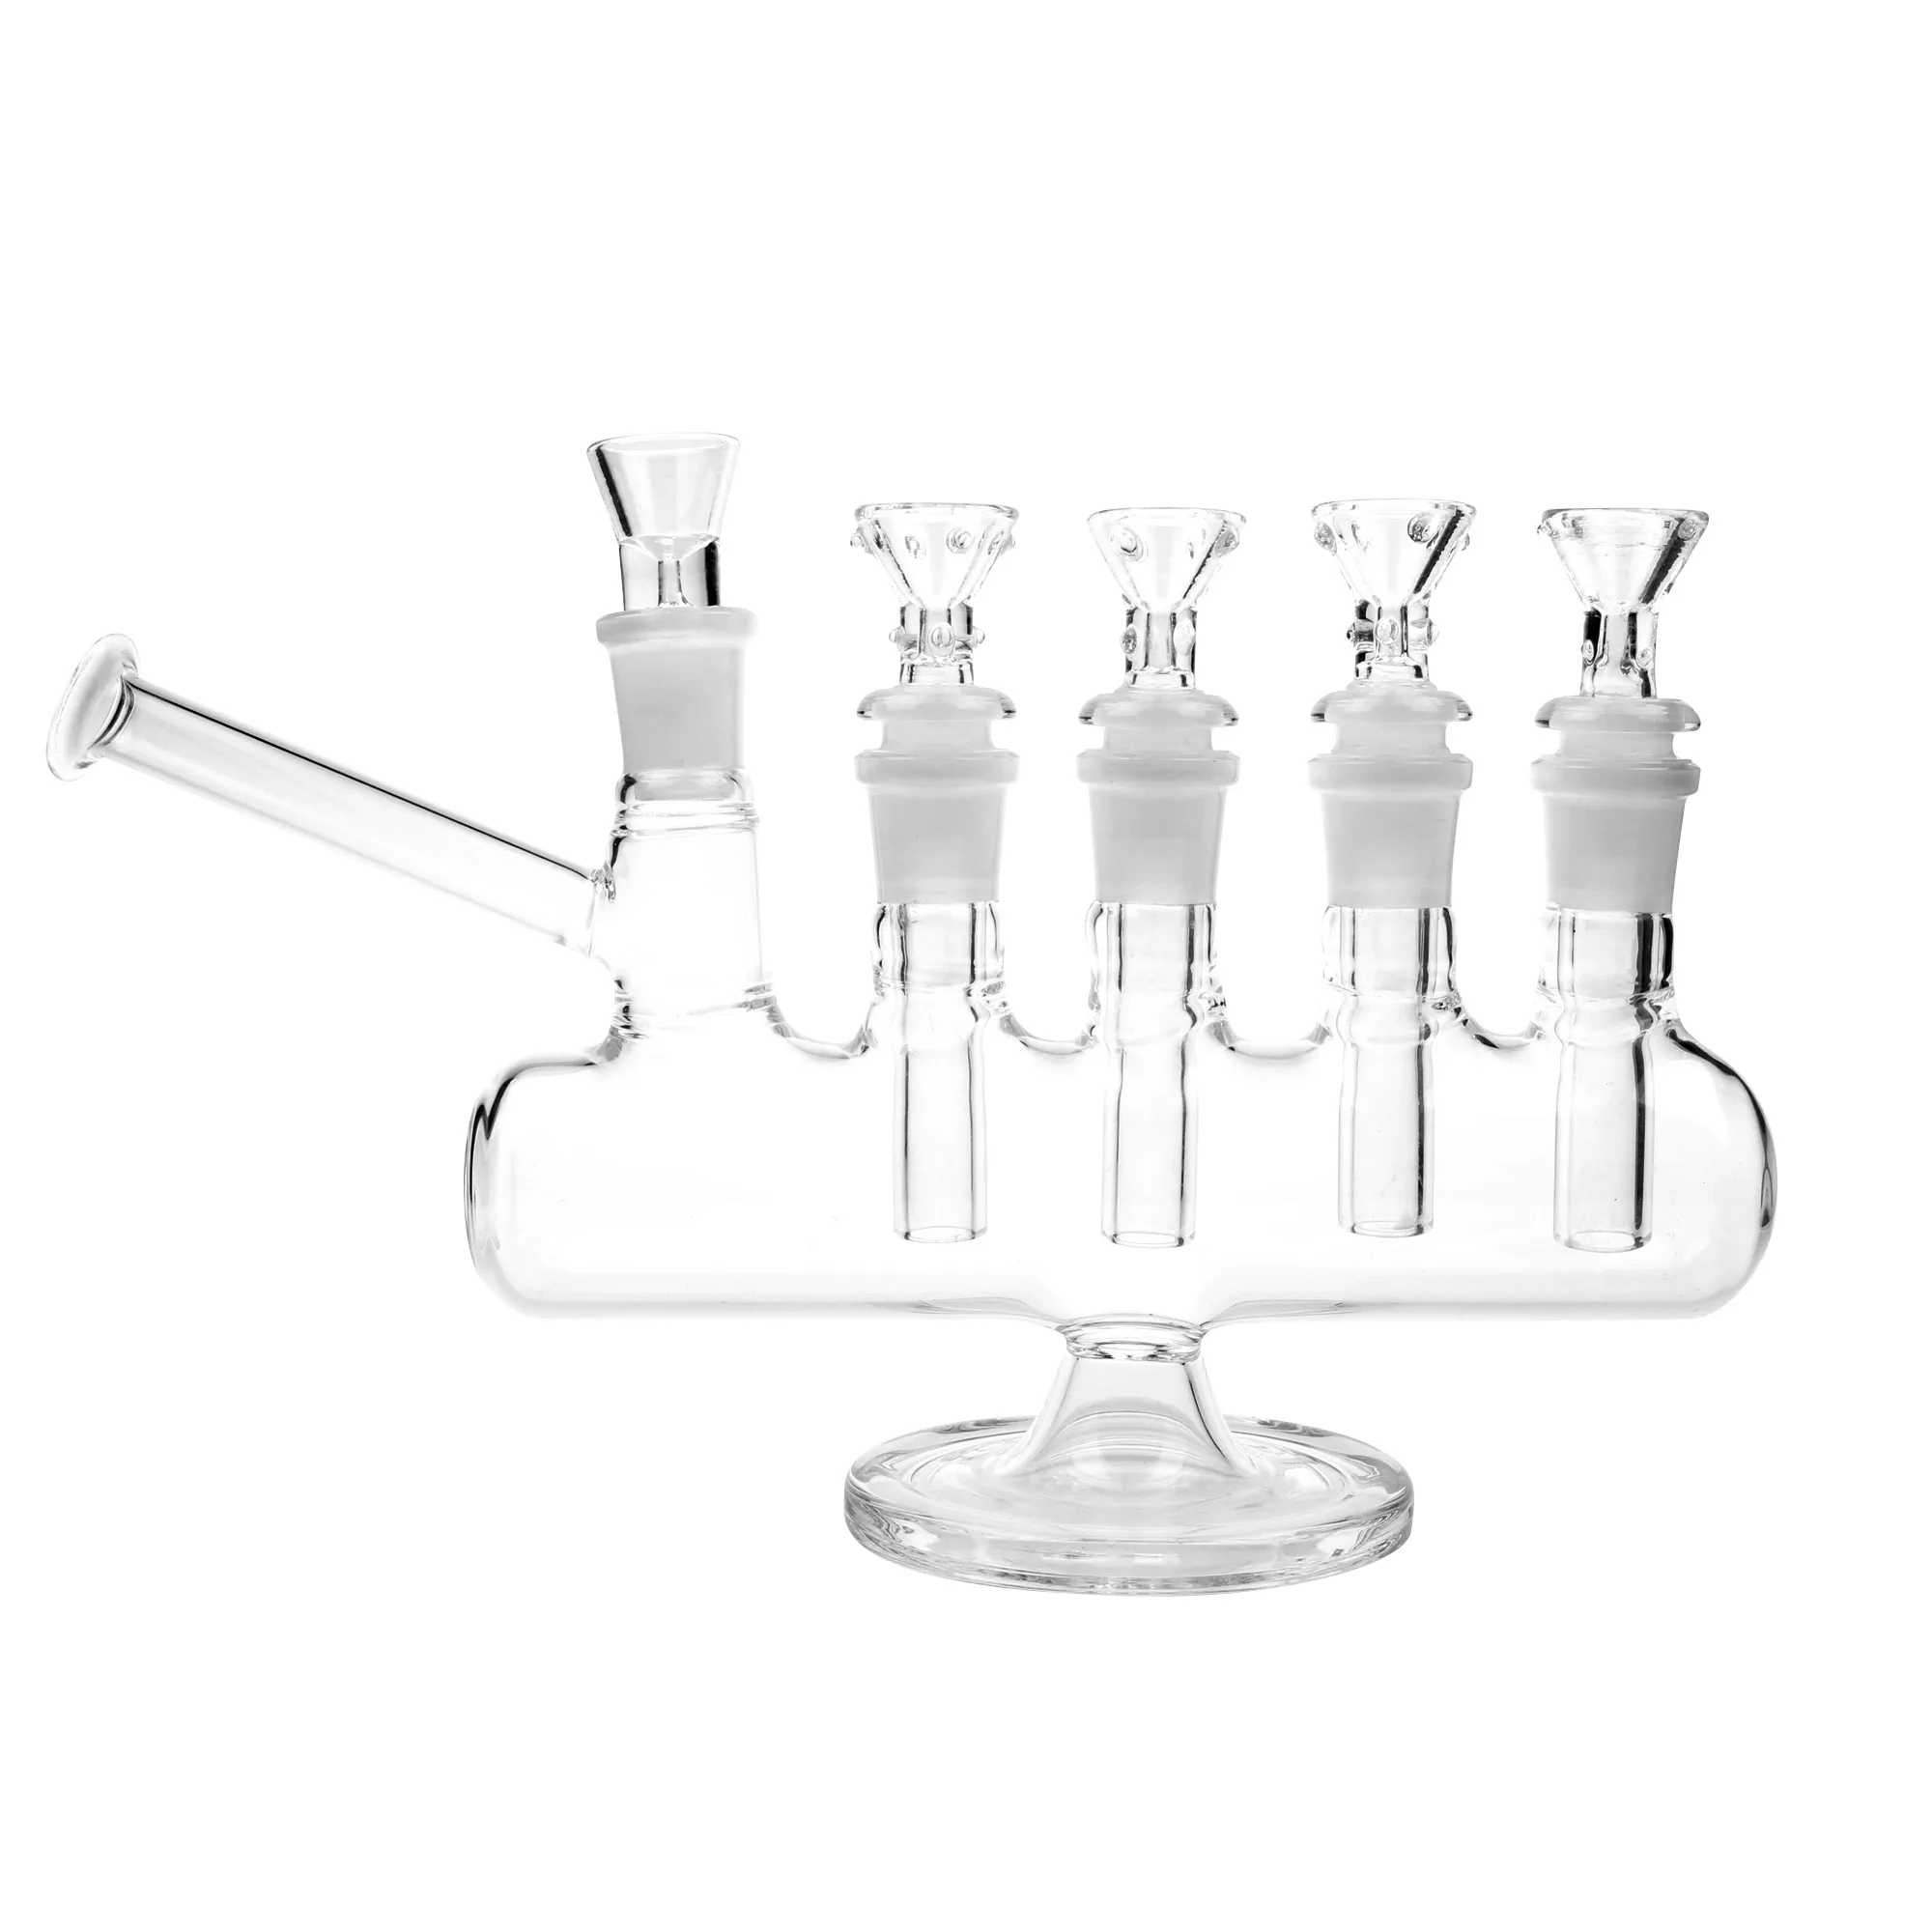 reanice(big-discount-today-to-4.20)-recycler-glass-bongs-14.5mm-bong-bowl-height-17in-straight-glass-pipes-honeycomb-branch-bong-water-oil.jpg